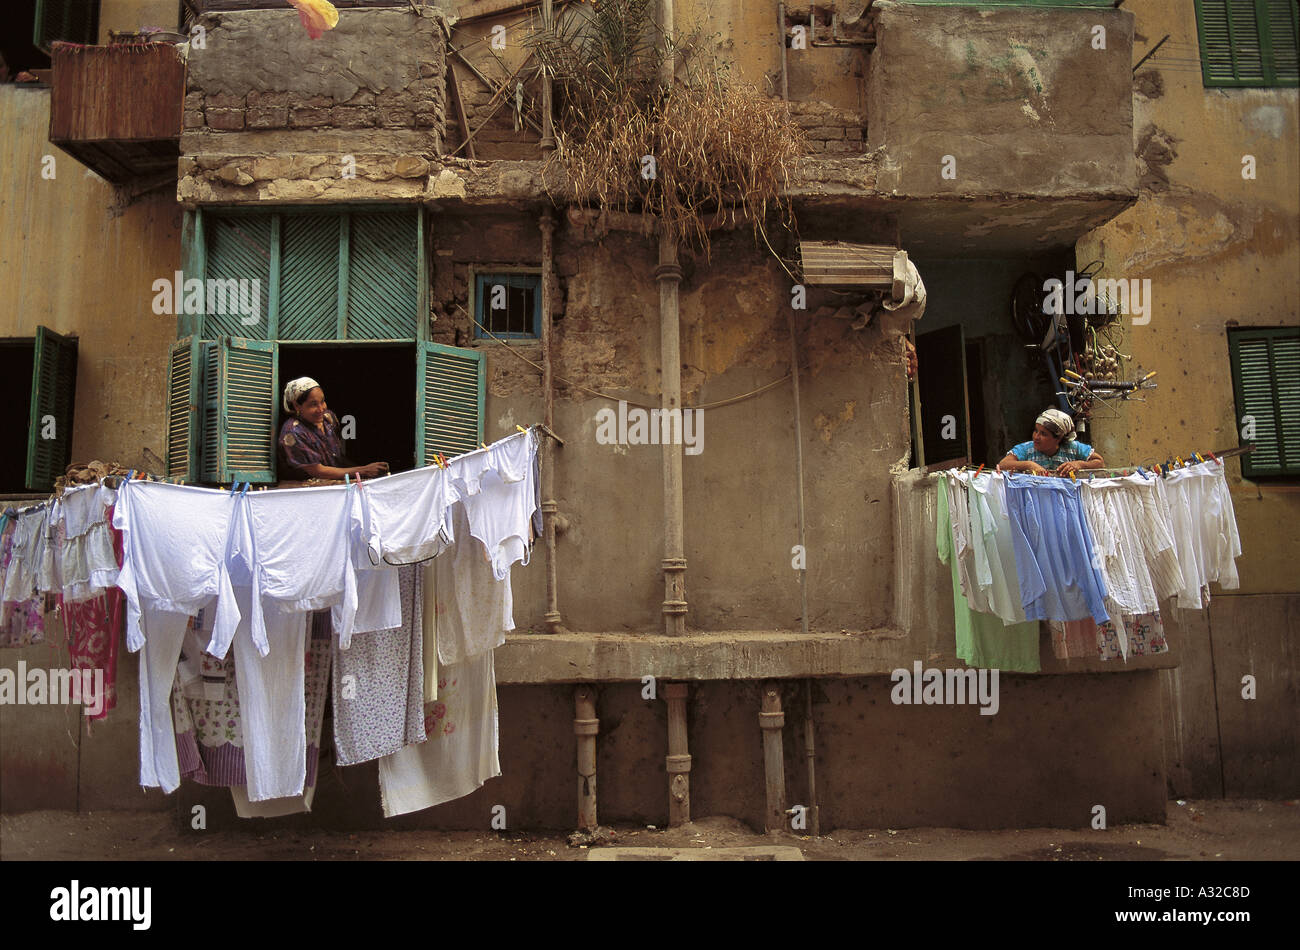 https://c8.alamy.com/comp/A32C8D/wash-day-with-laundry-hanging-outside-a-window-of-a-house-in-old-cairo-A32C8D.jpg